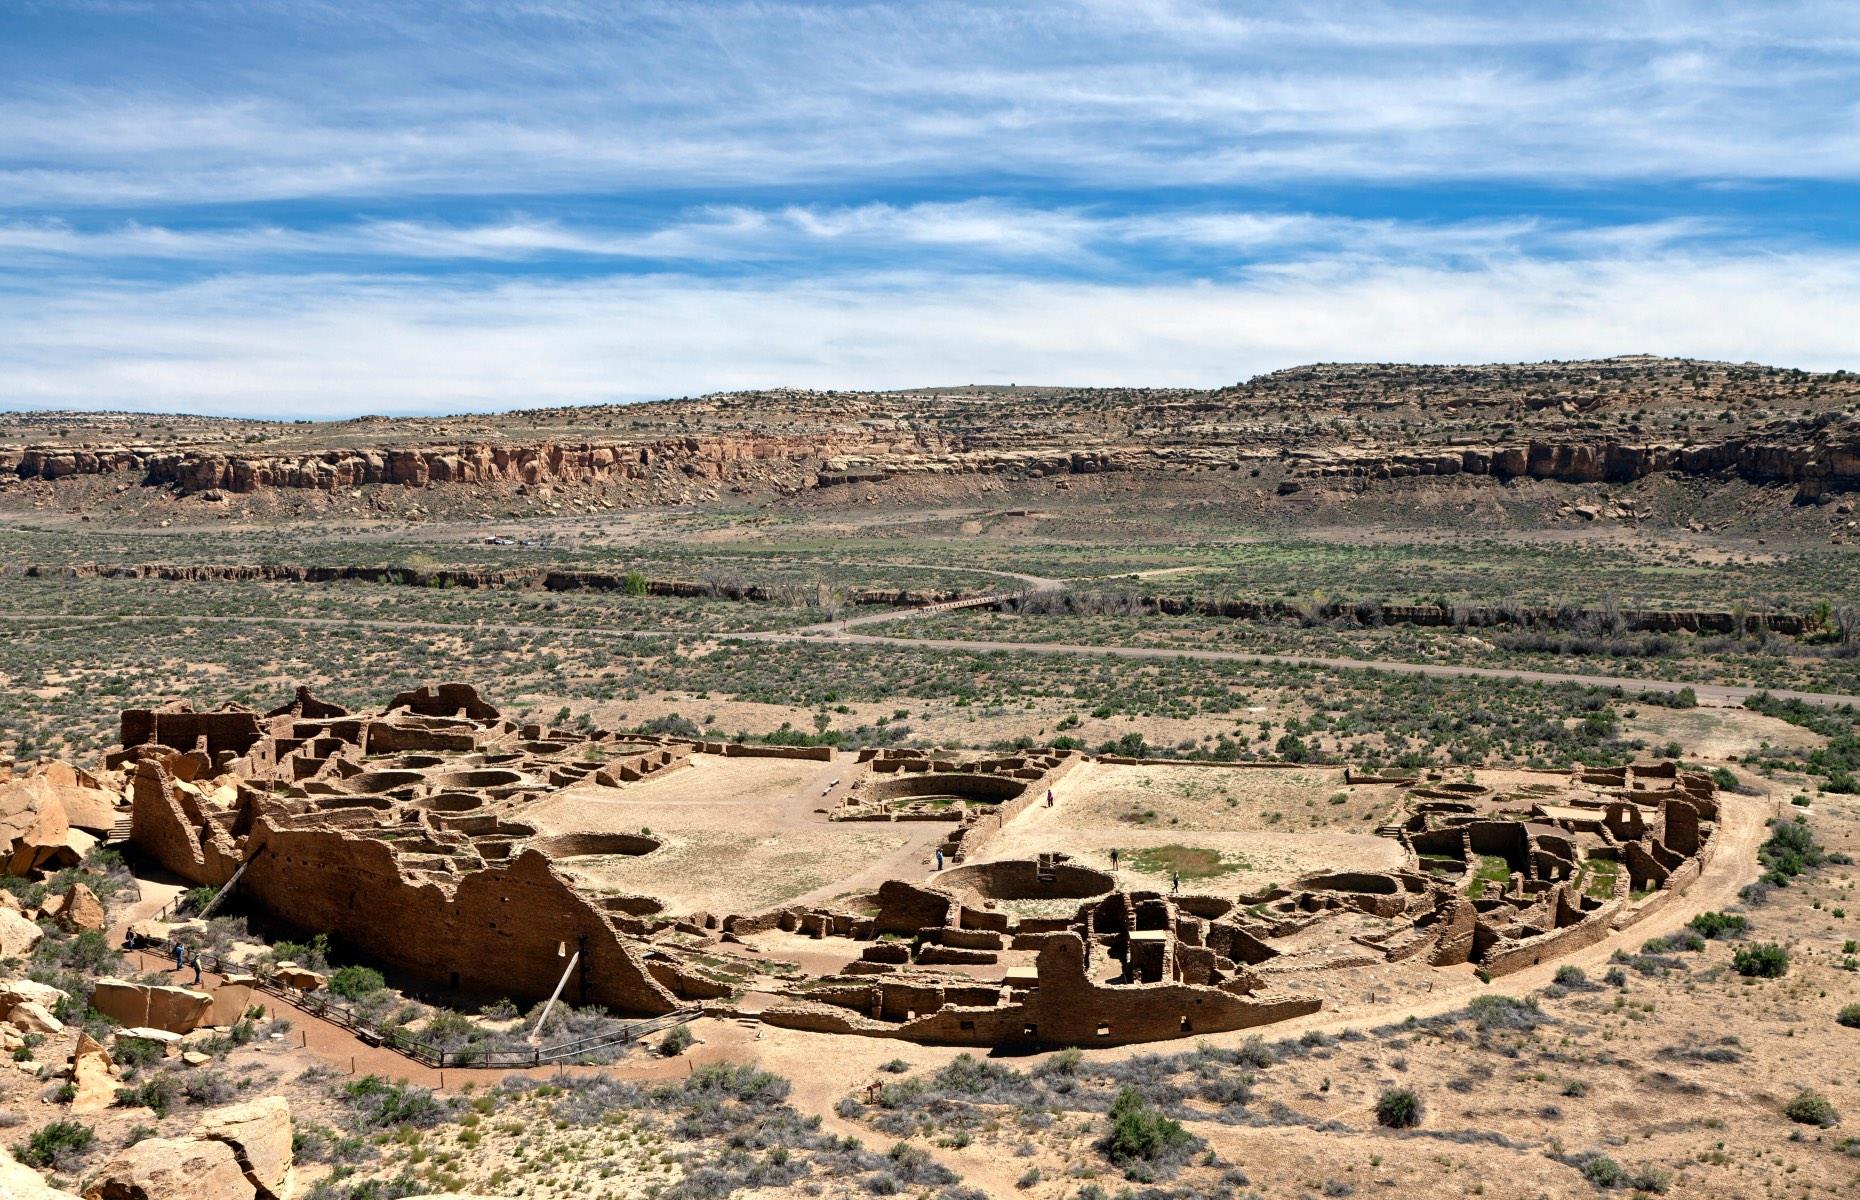 <p>The American Southwest is home to several other sites that testify to the Ancestral Puebloan people's architectural abilities. These include the remote Chaco Canyon in New Mexico, home to the ruins of a community said to have been the center of the Ancient Puebloan culture, and the lesser-known River House in Utah, a multi-room cliff dwelling which can only be reached by river. The latter is often described as one of the most impressive Native American sites in the entire US. </p>  <p><a href="https://www.loveexploring.com/gallerylist/87937/incredible-ancient-ruins-in-the-usa-you-probably-didnt-know-existed"><strong>Now discover incredible ancient ruins in the USA you probably didn't know existed</strong></a></p>